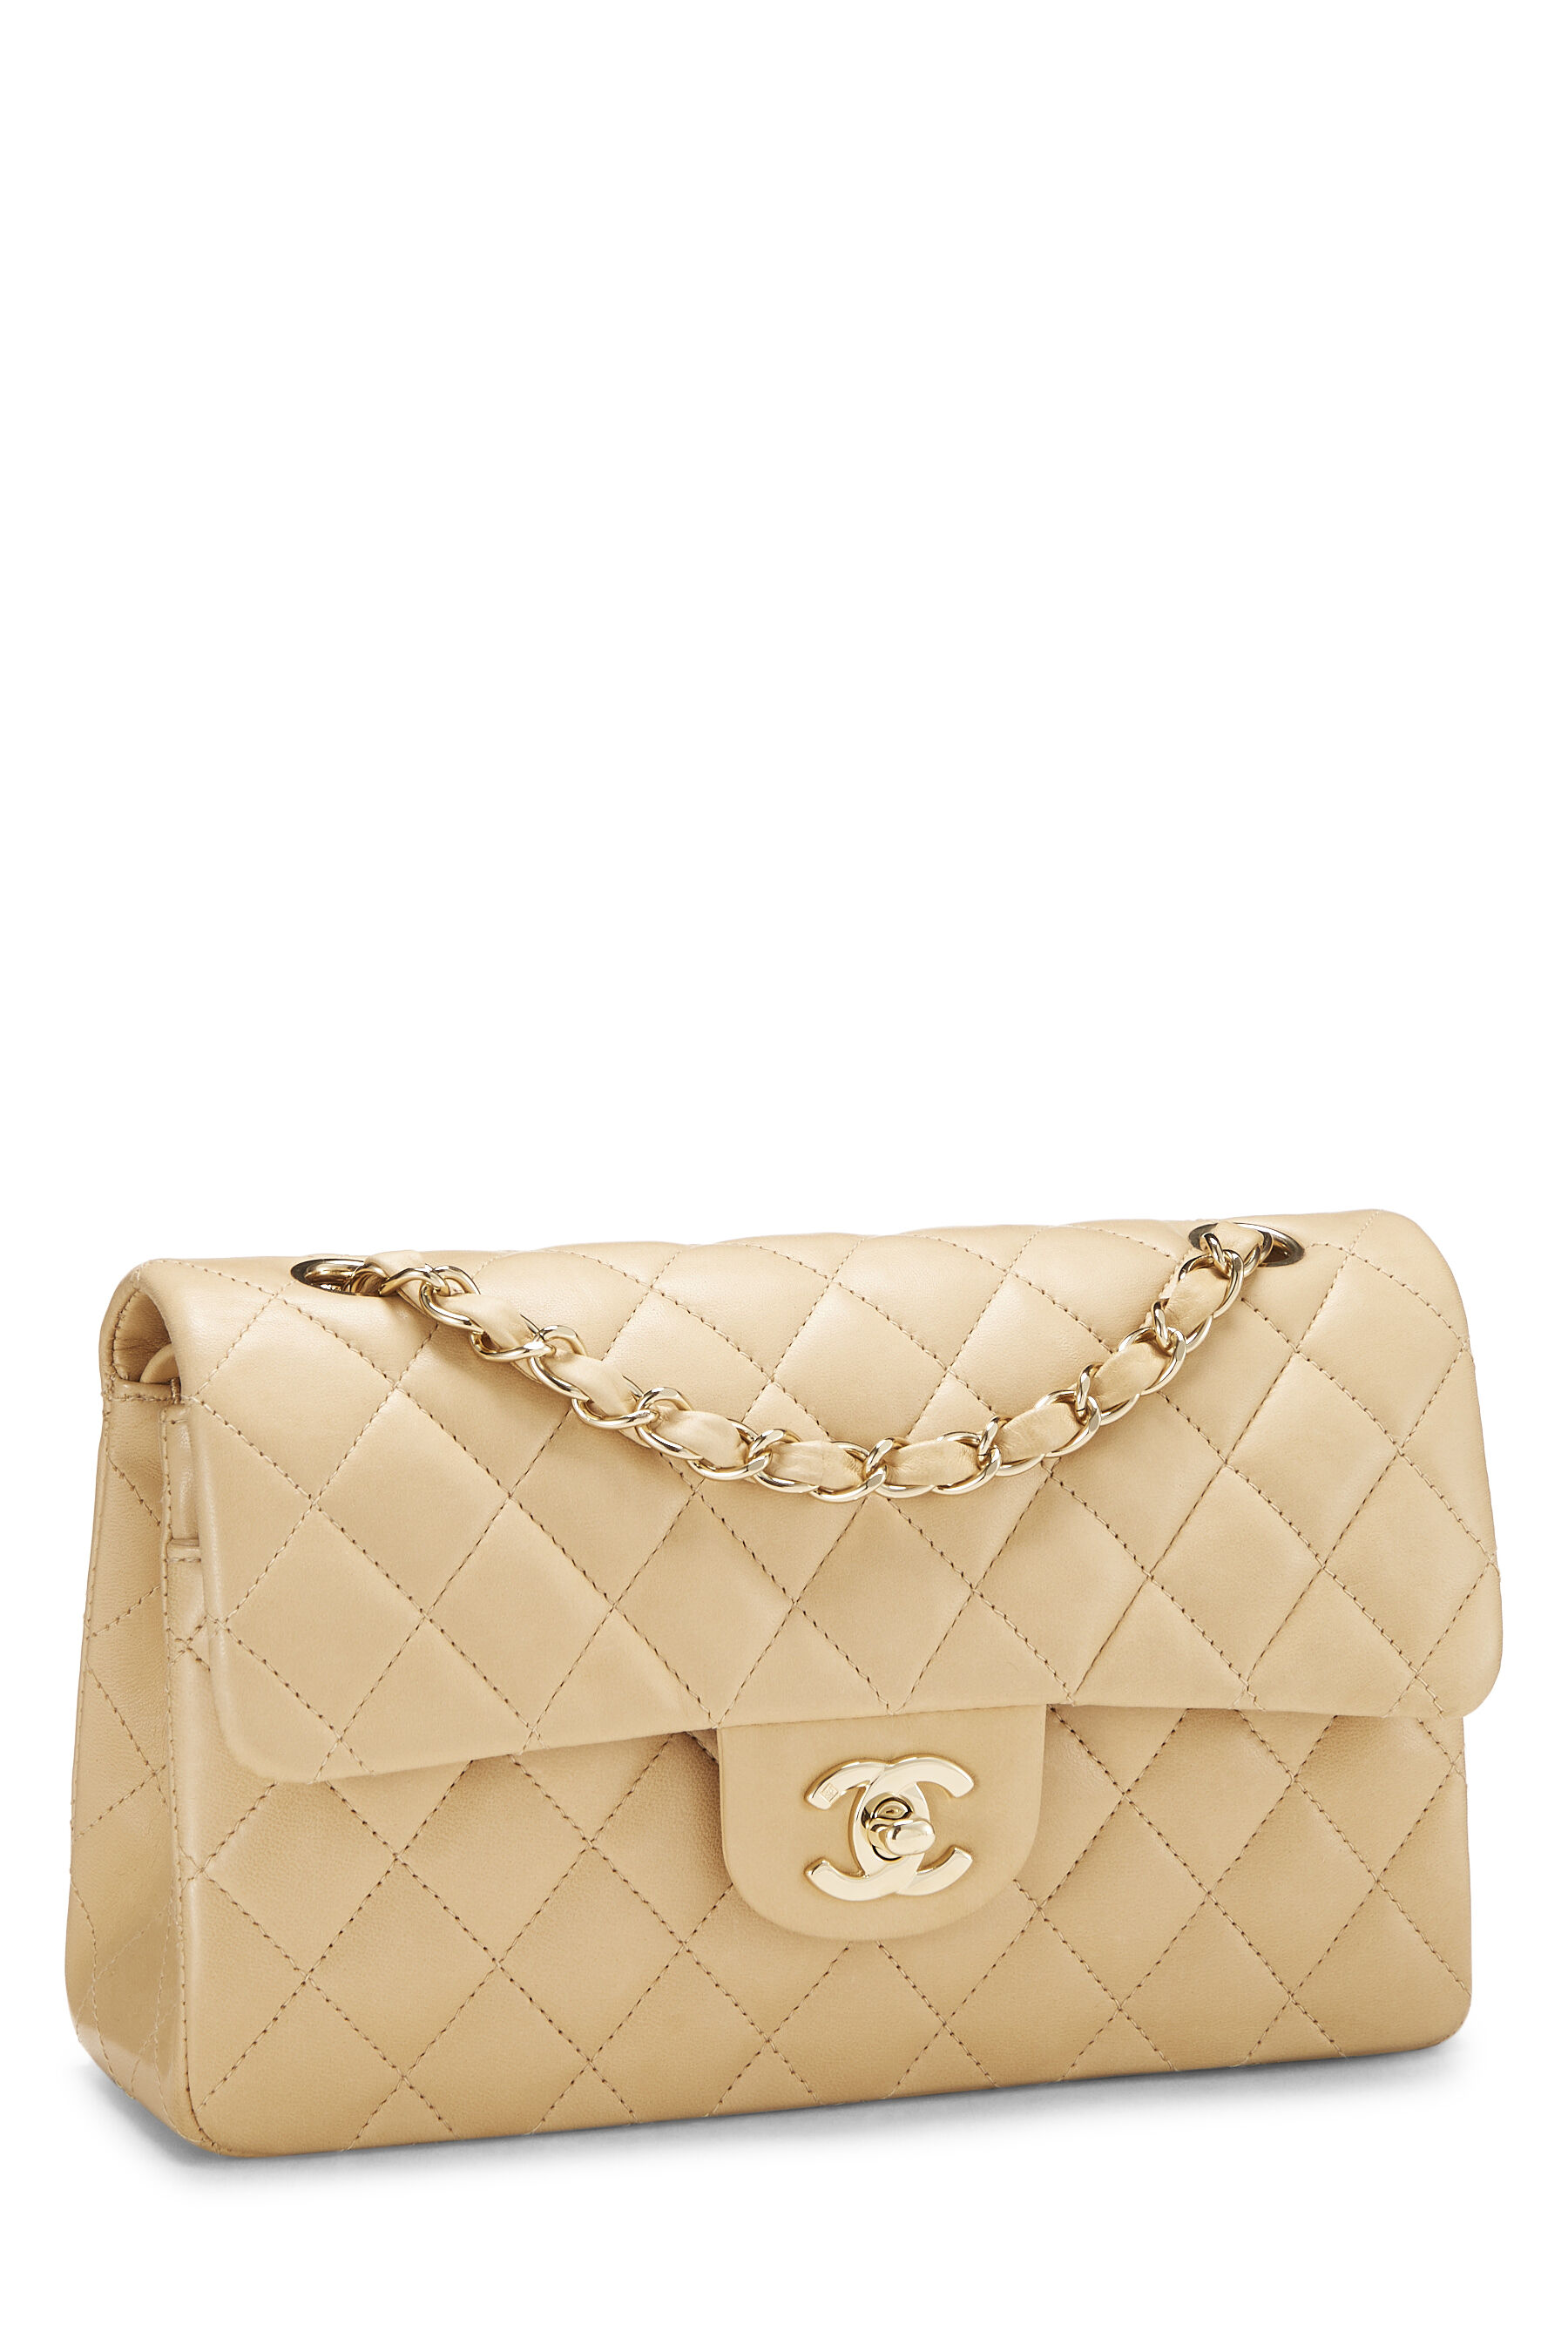 Chanel Beige Quilted Lambskin Classic Double Flap Small Q6B0101II1078